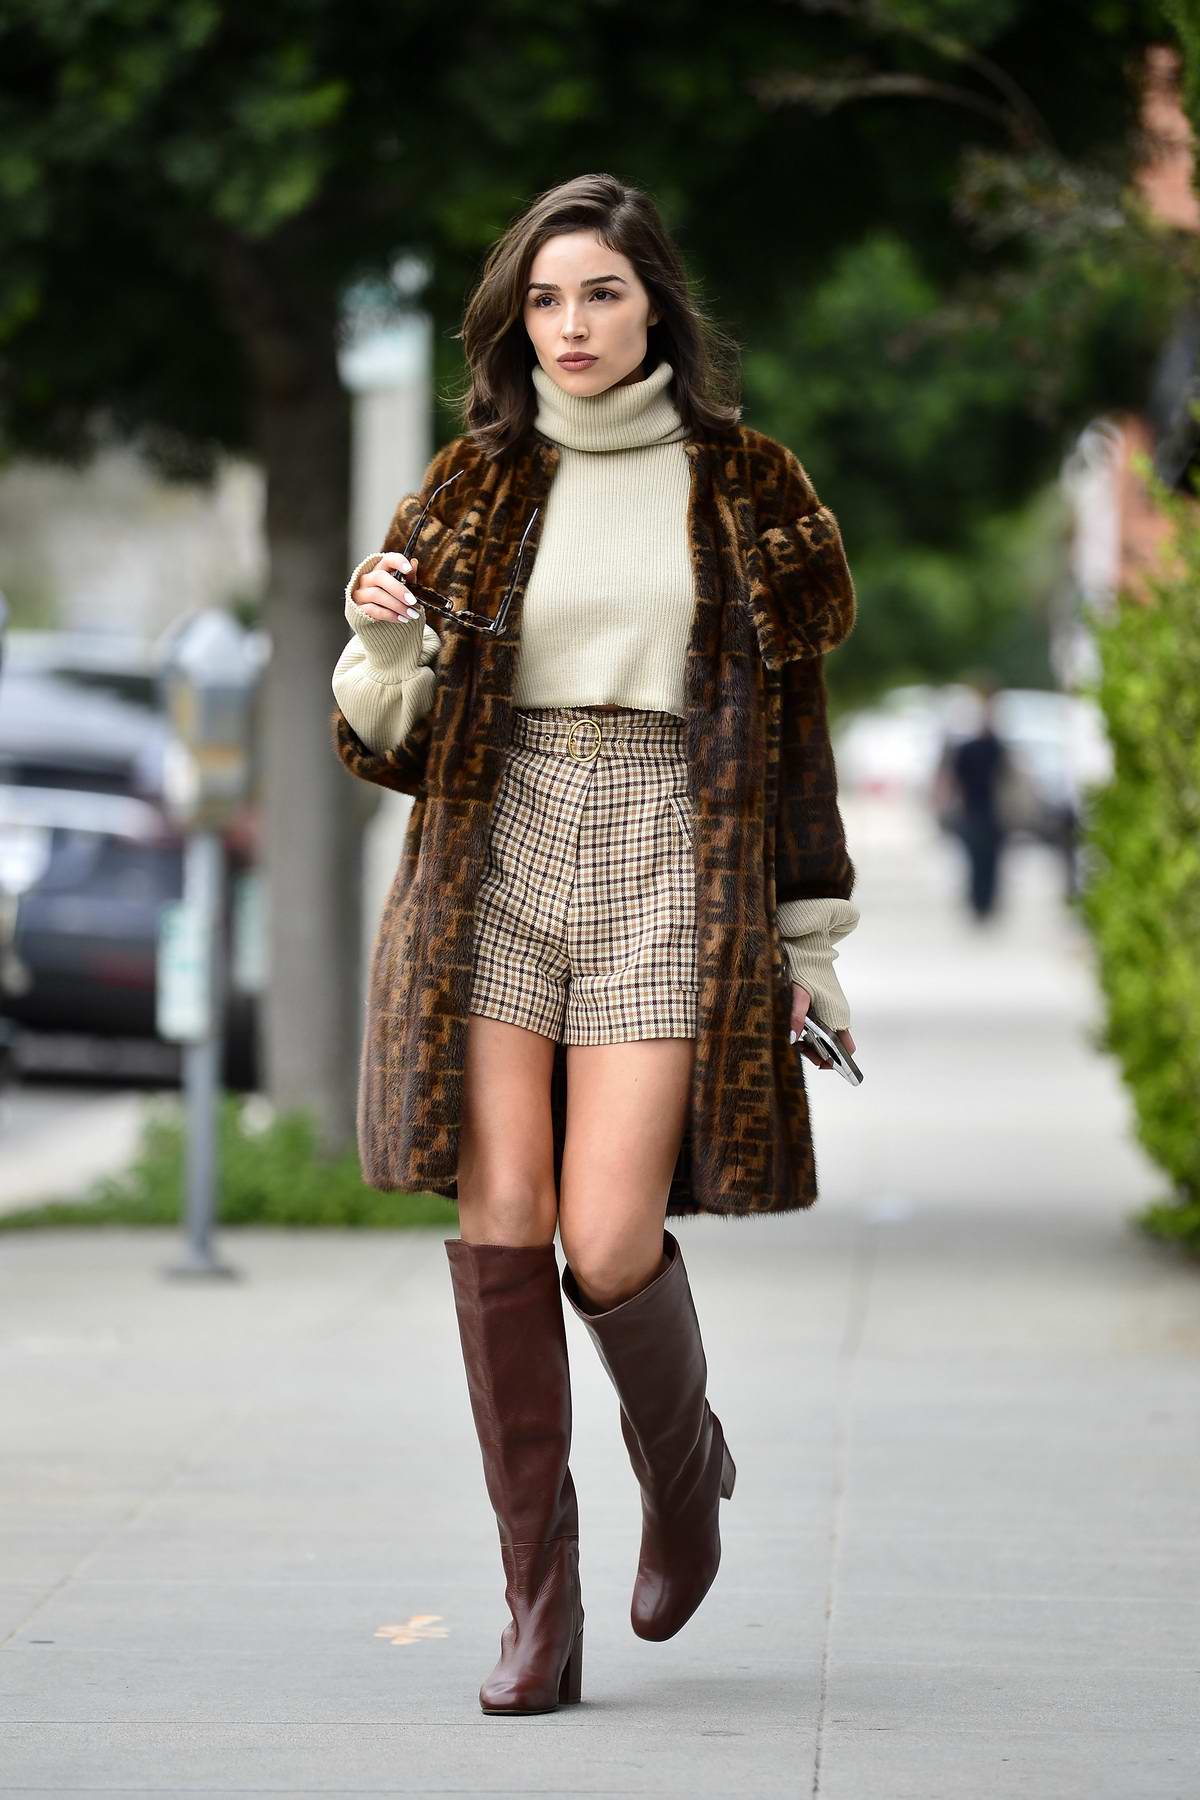 Olivia Culpo looks super stylish in a Fendi fur coat paired with a